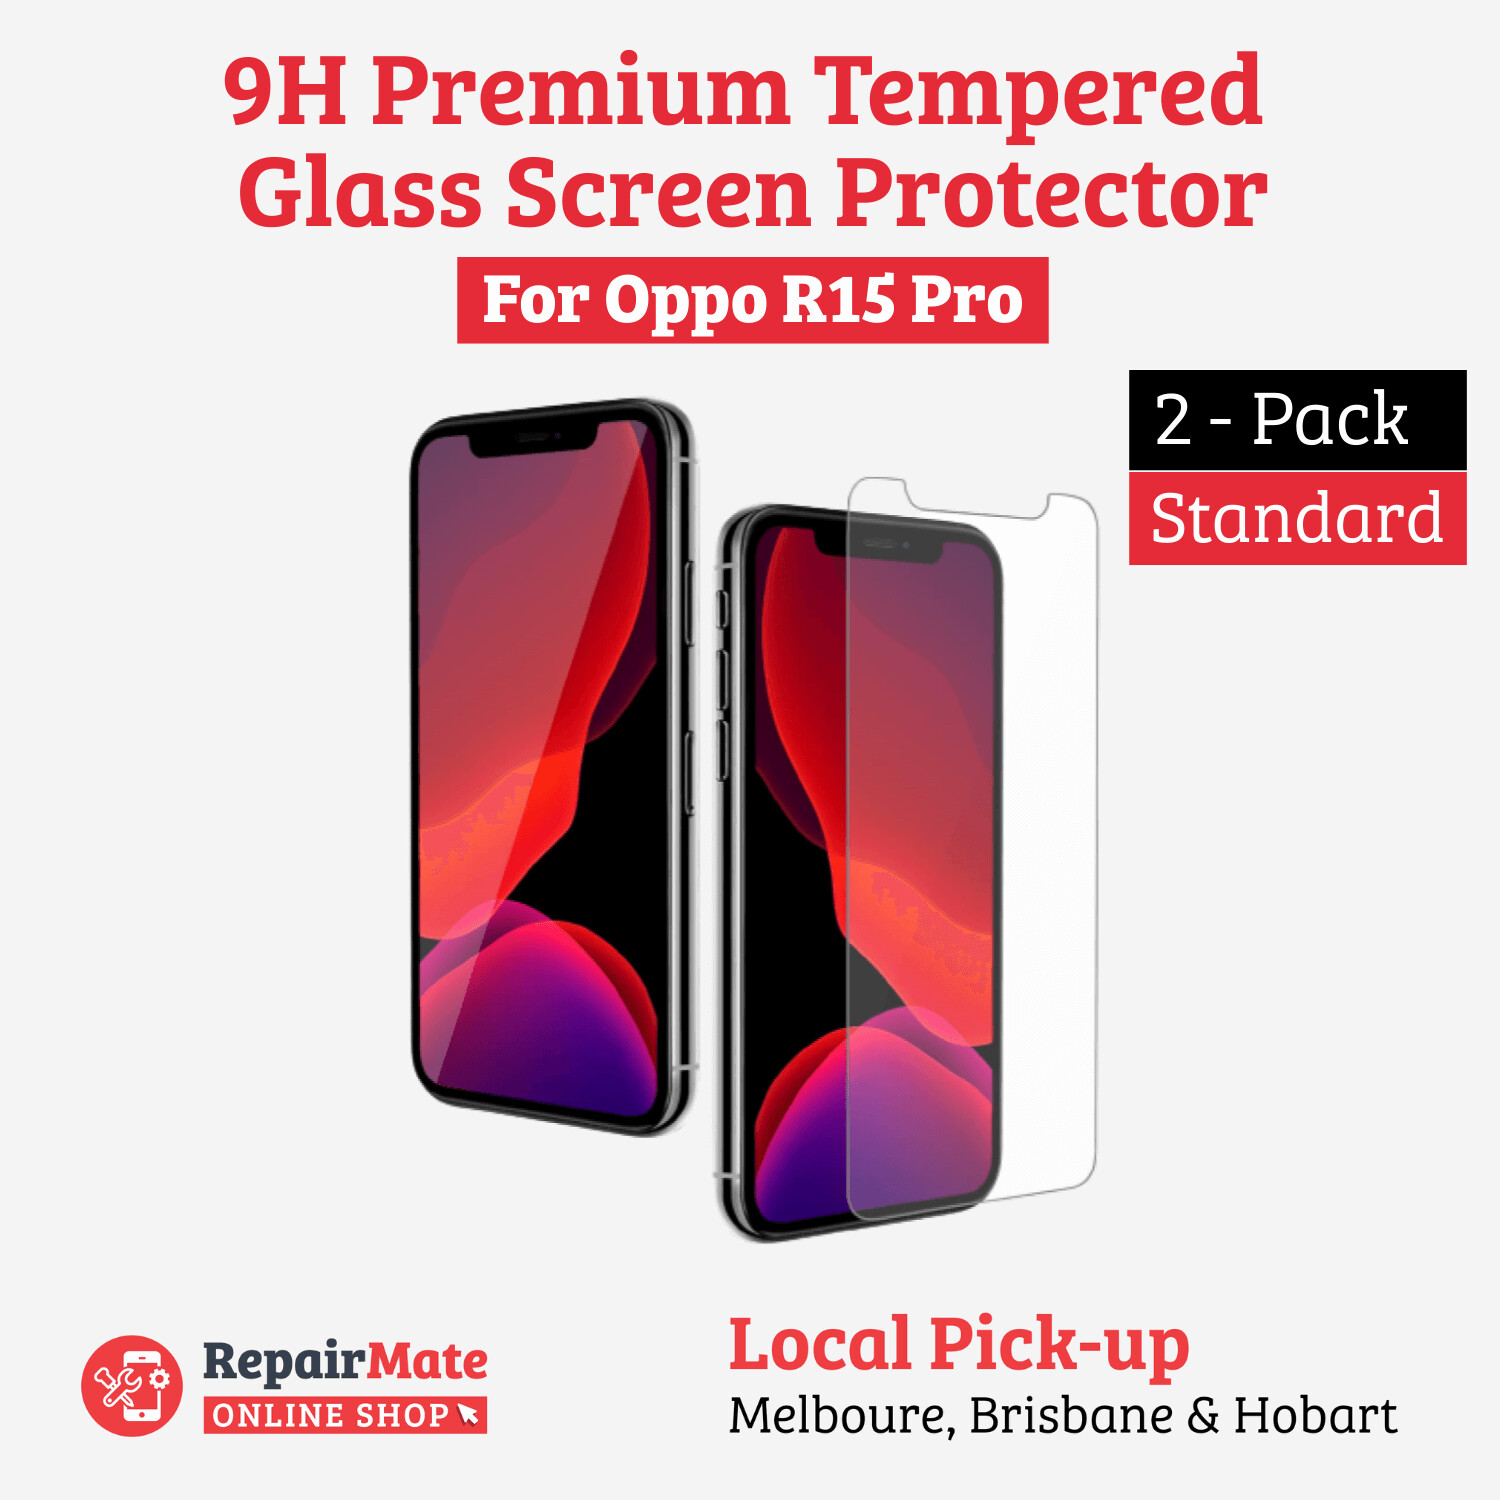 Oppo R15 Pro 9H Premium Tempered Glass Screen Protector [2 Pack]